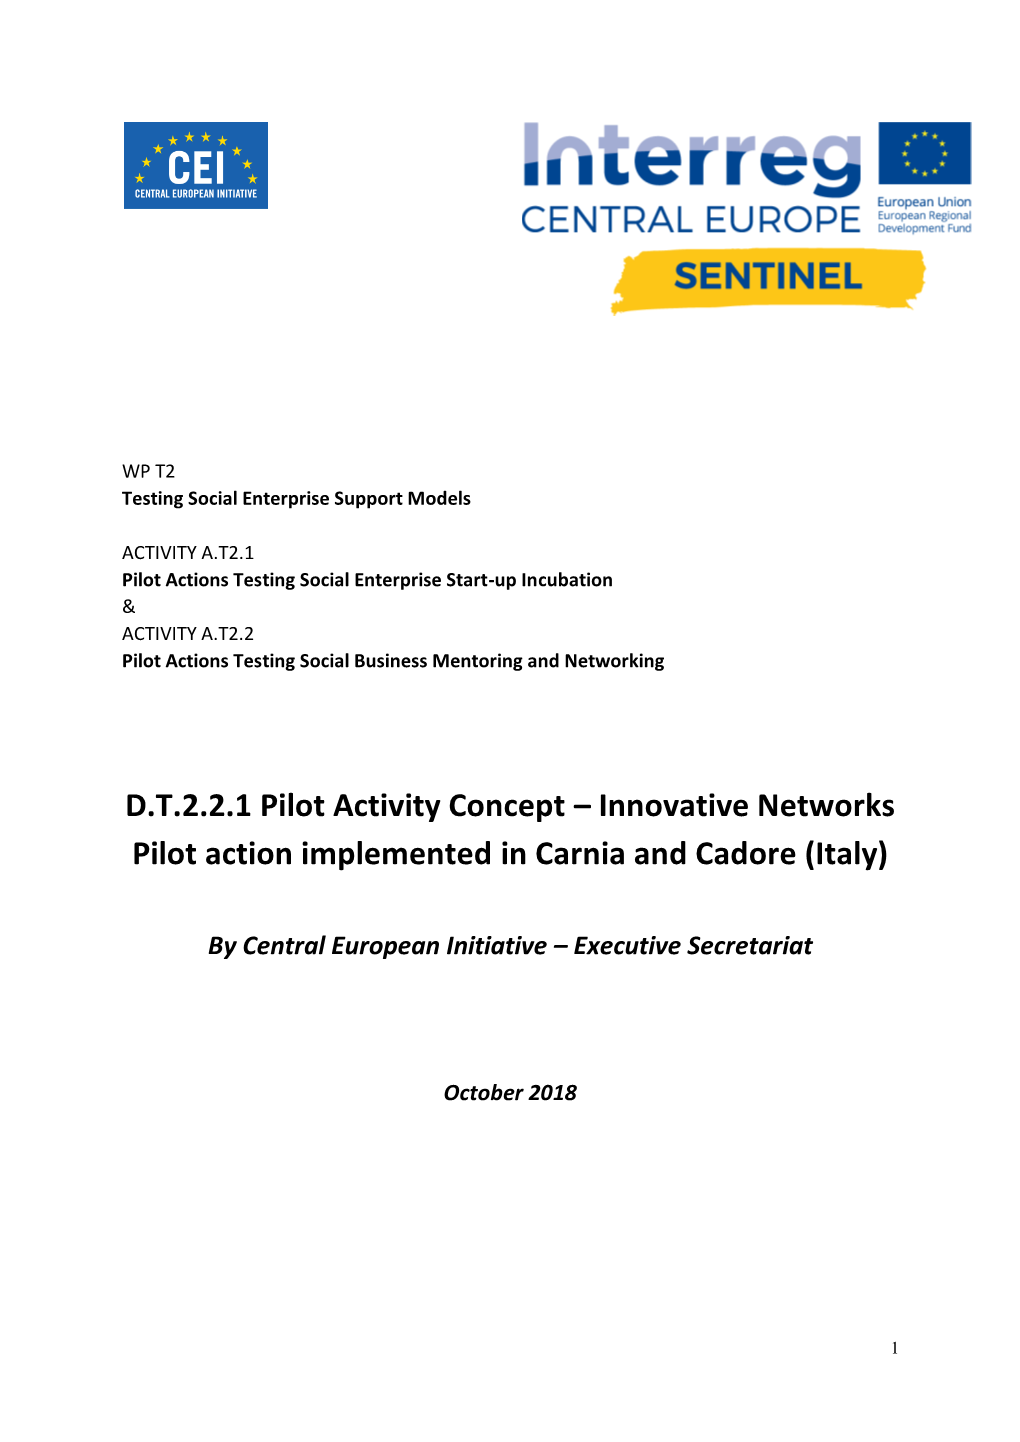 D.T.2.2.1 Pilot Activity Concept – Innovative Networks Pilot Action Implemented in Carnia and Cadore (Italy)